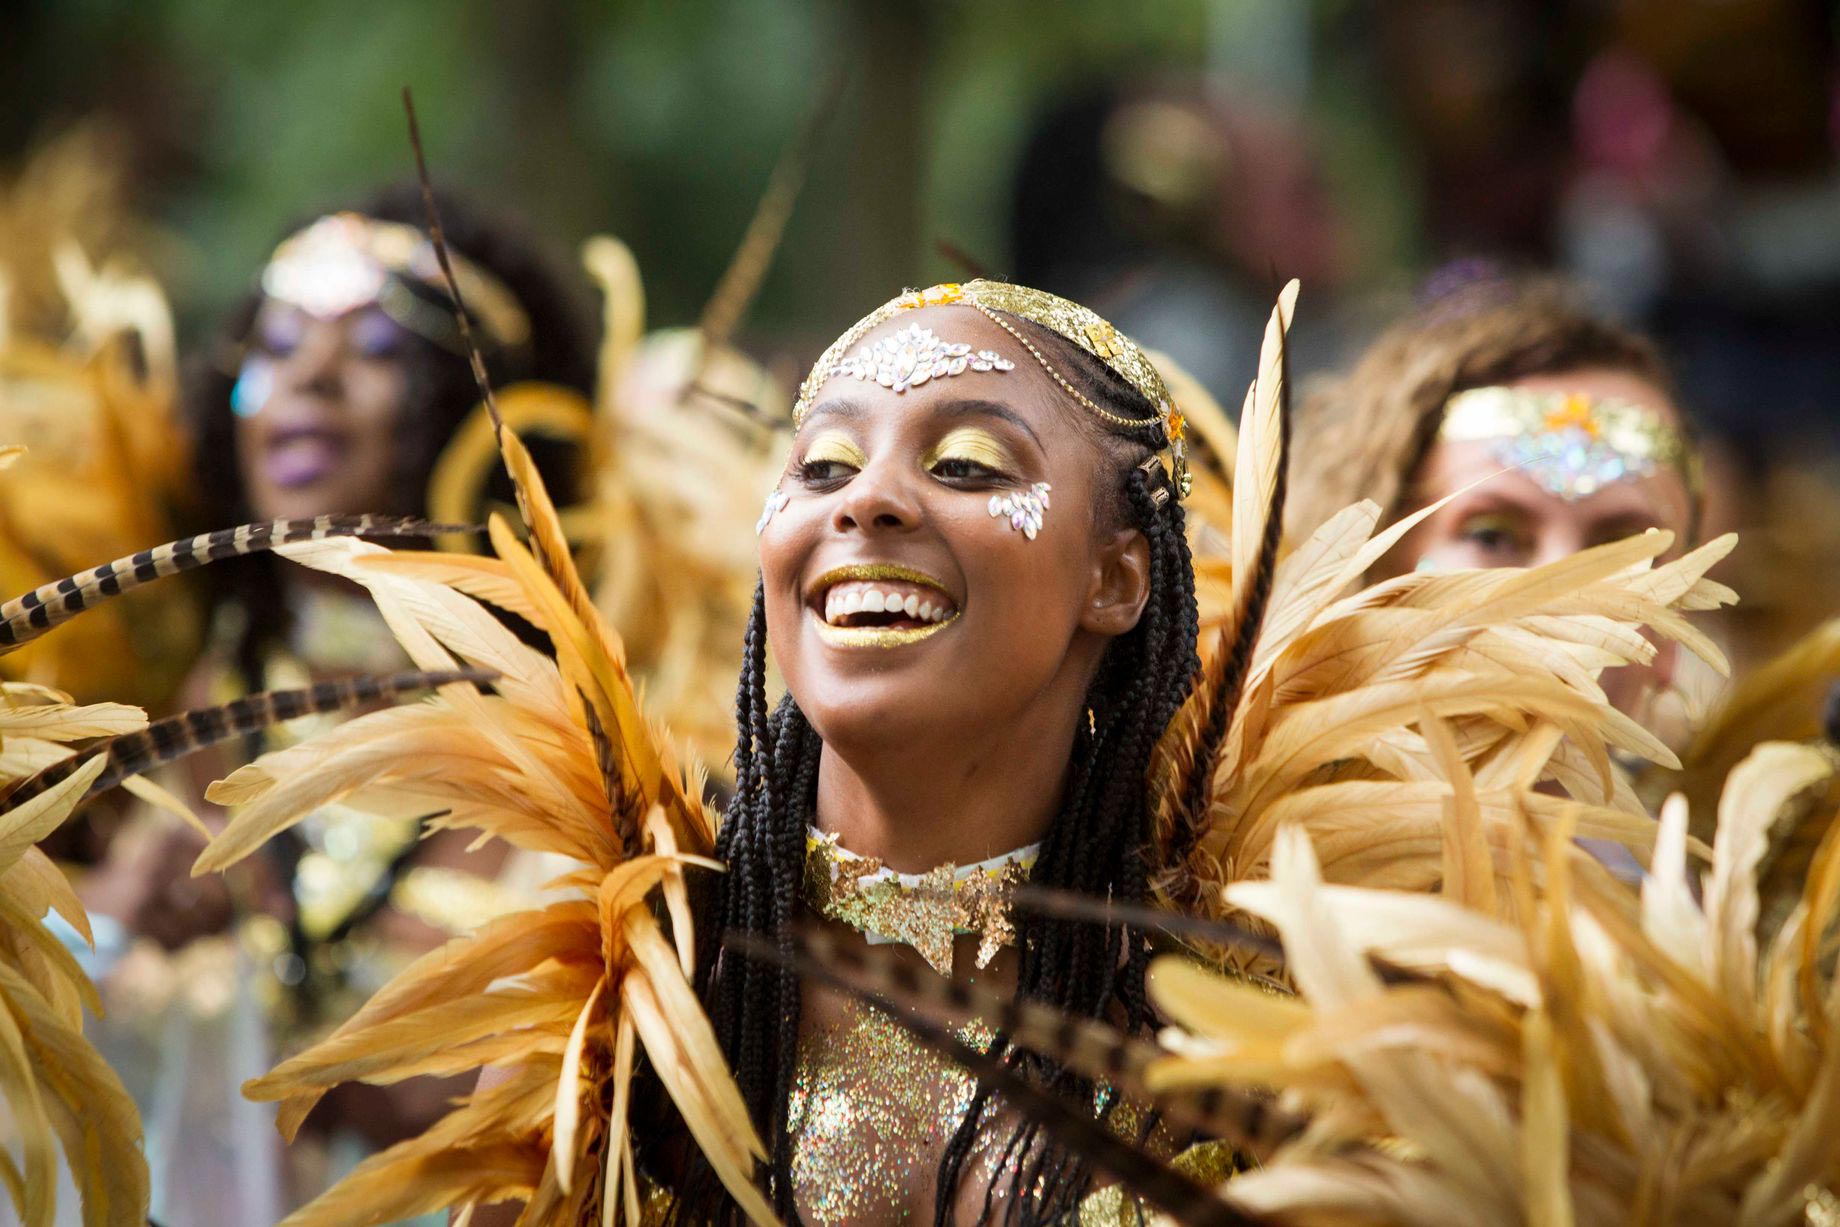 Leeds West Indian Carnival performer (photo by Chris Bull)